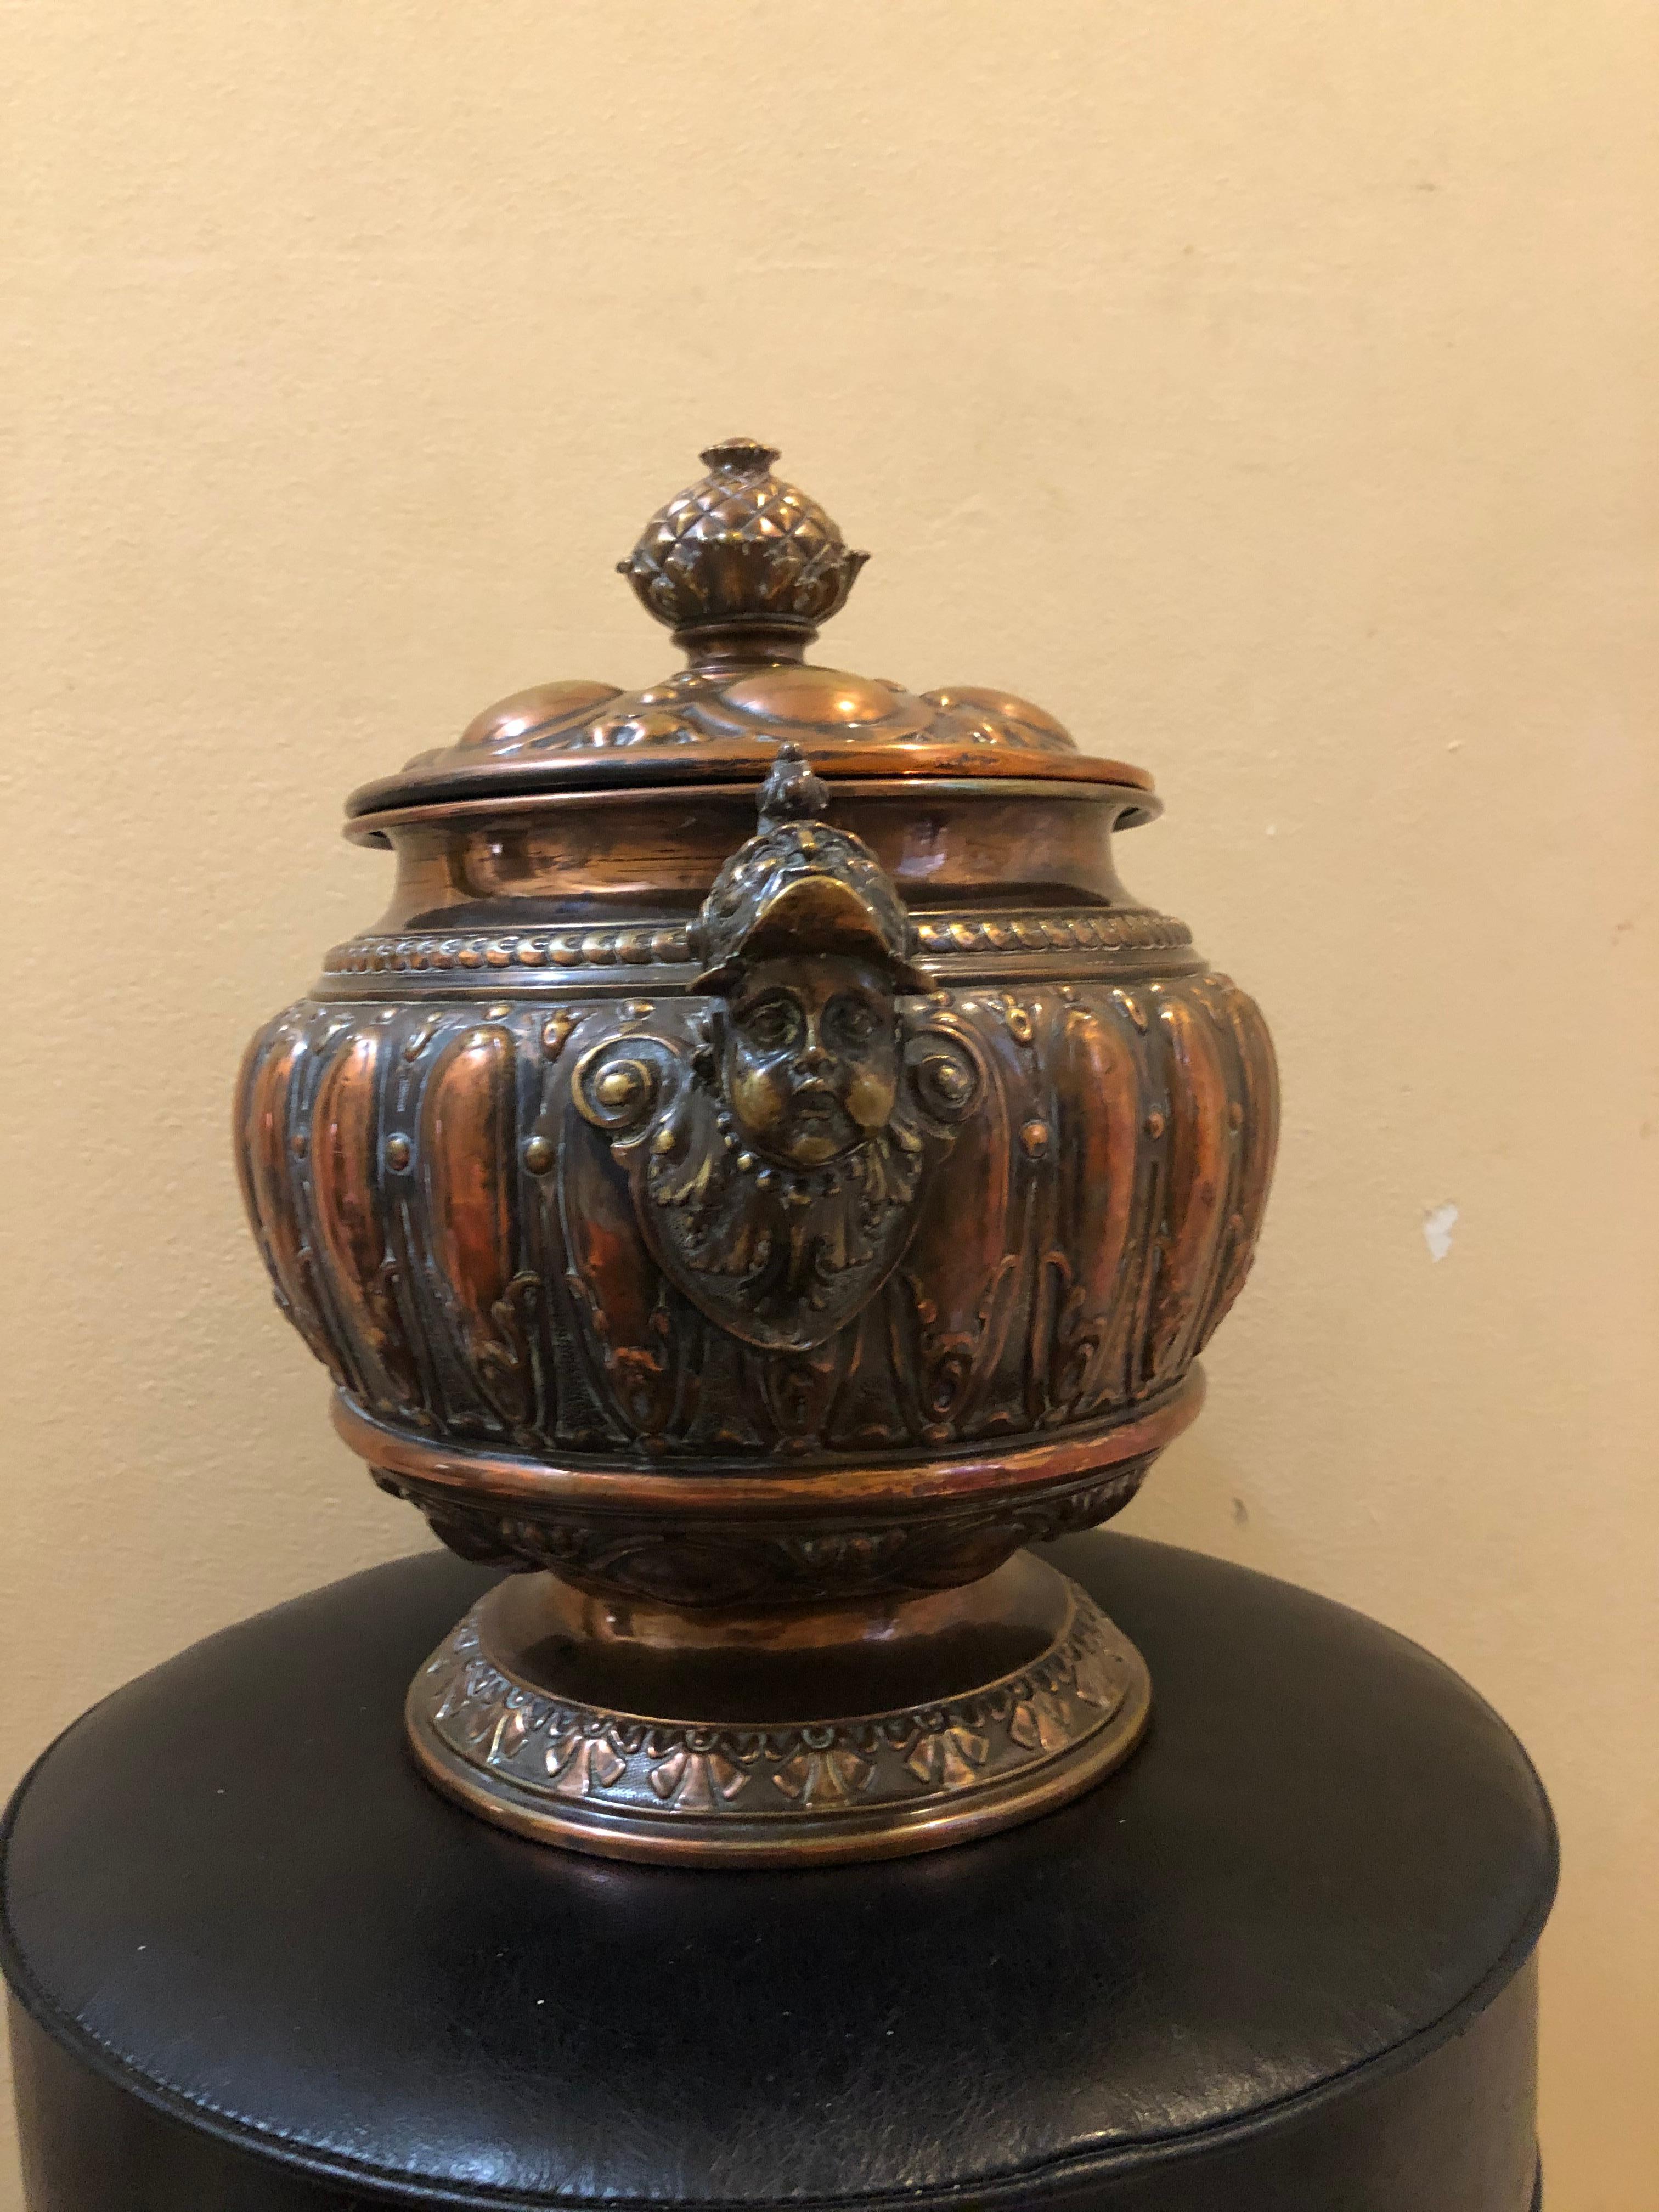 Incredible one of a kind repousse copper tureen. Most likely late 18th century or early 19th century. This fabulous hand-hammered piece is decorated with spectacular guard handles. This was obviously handmade for an extremely wealthy individual,